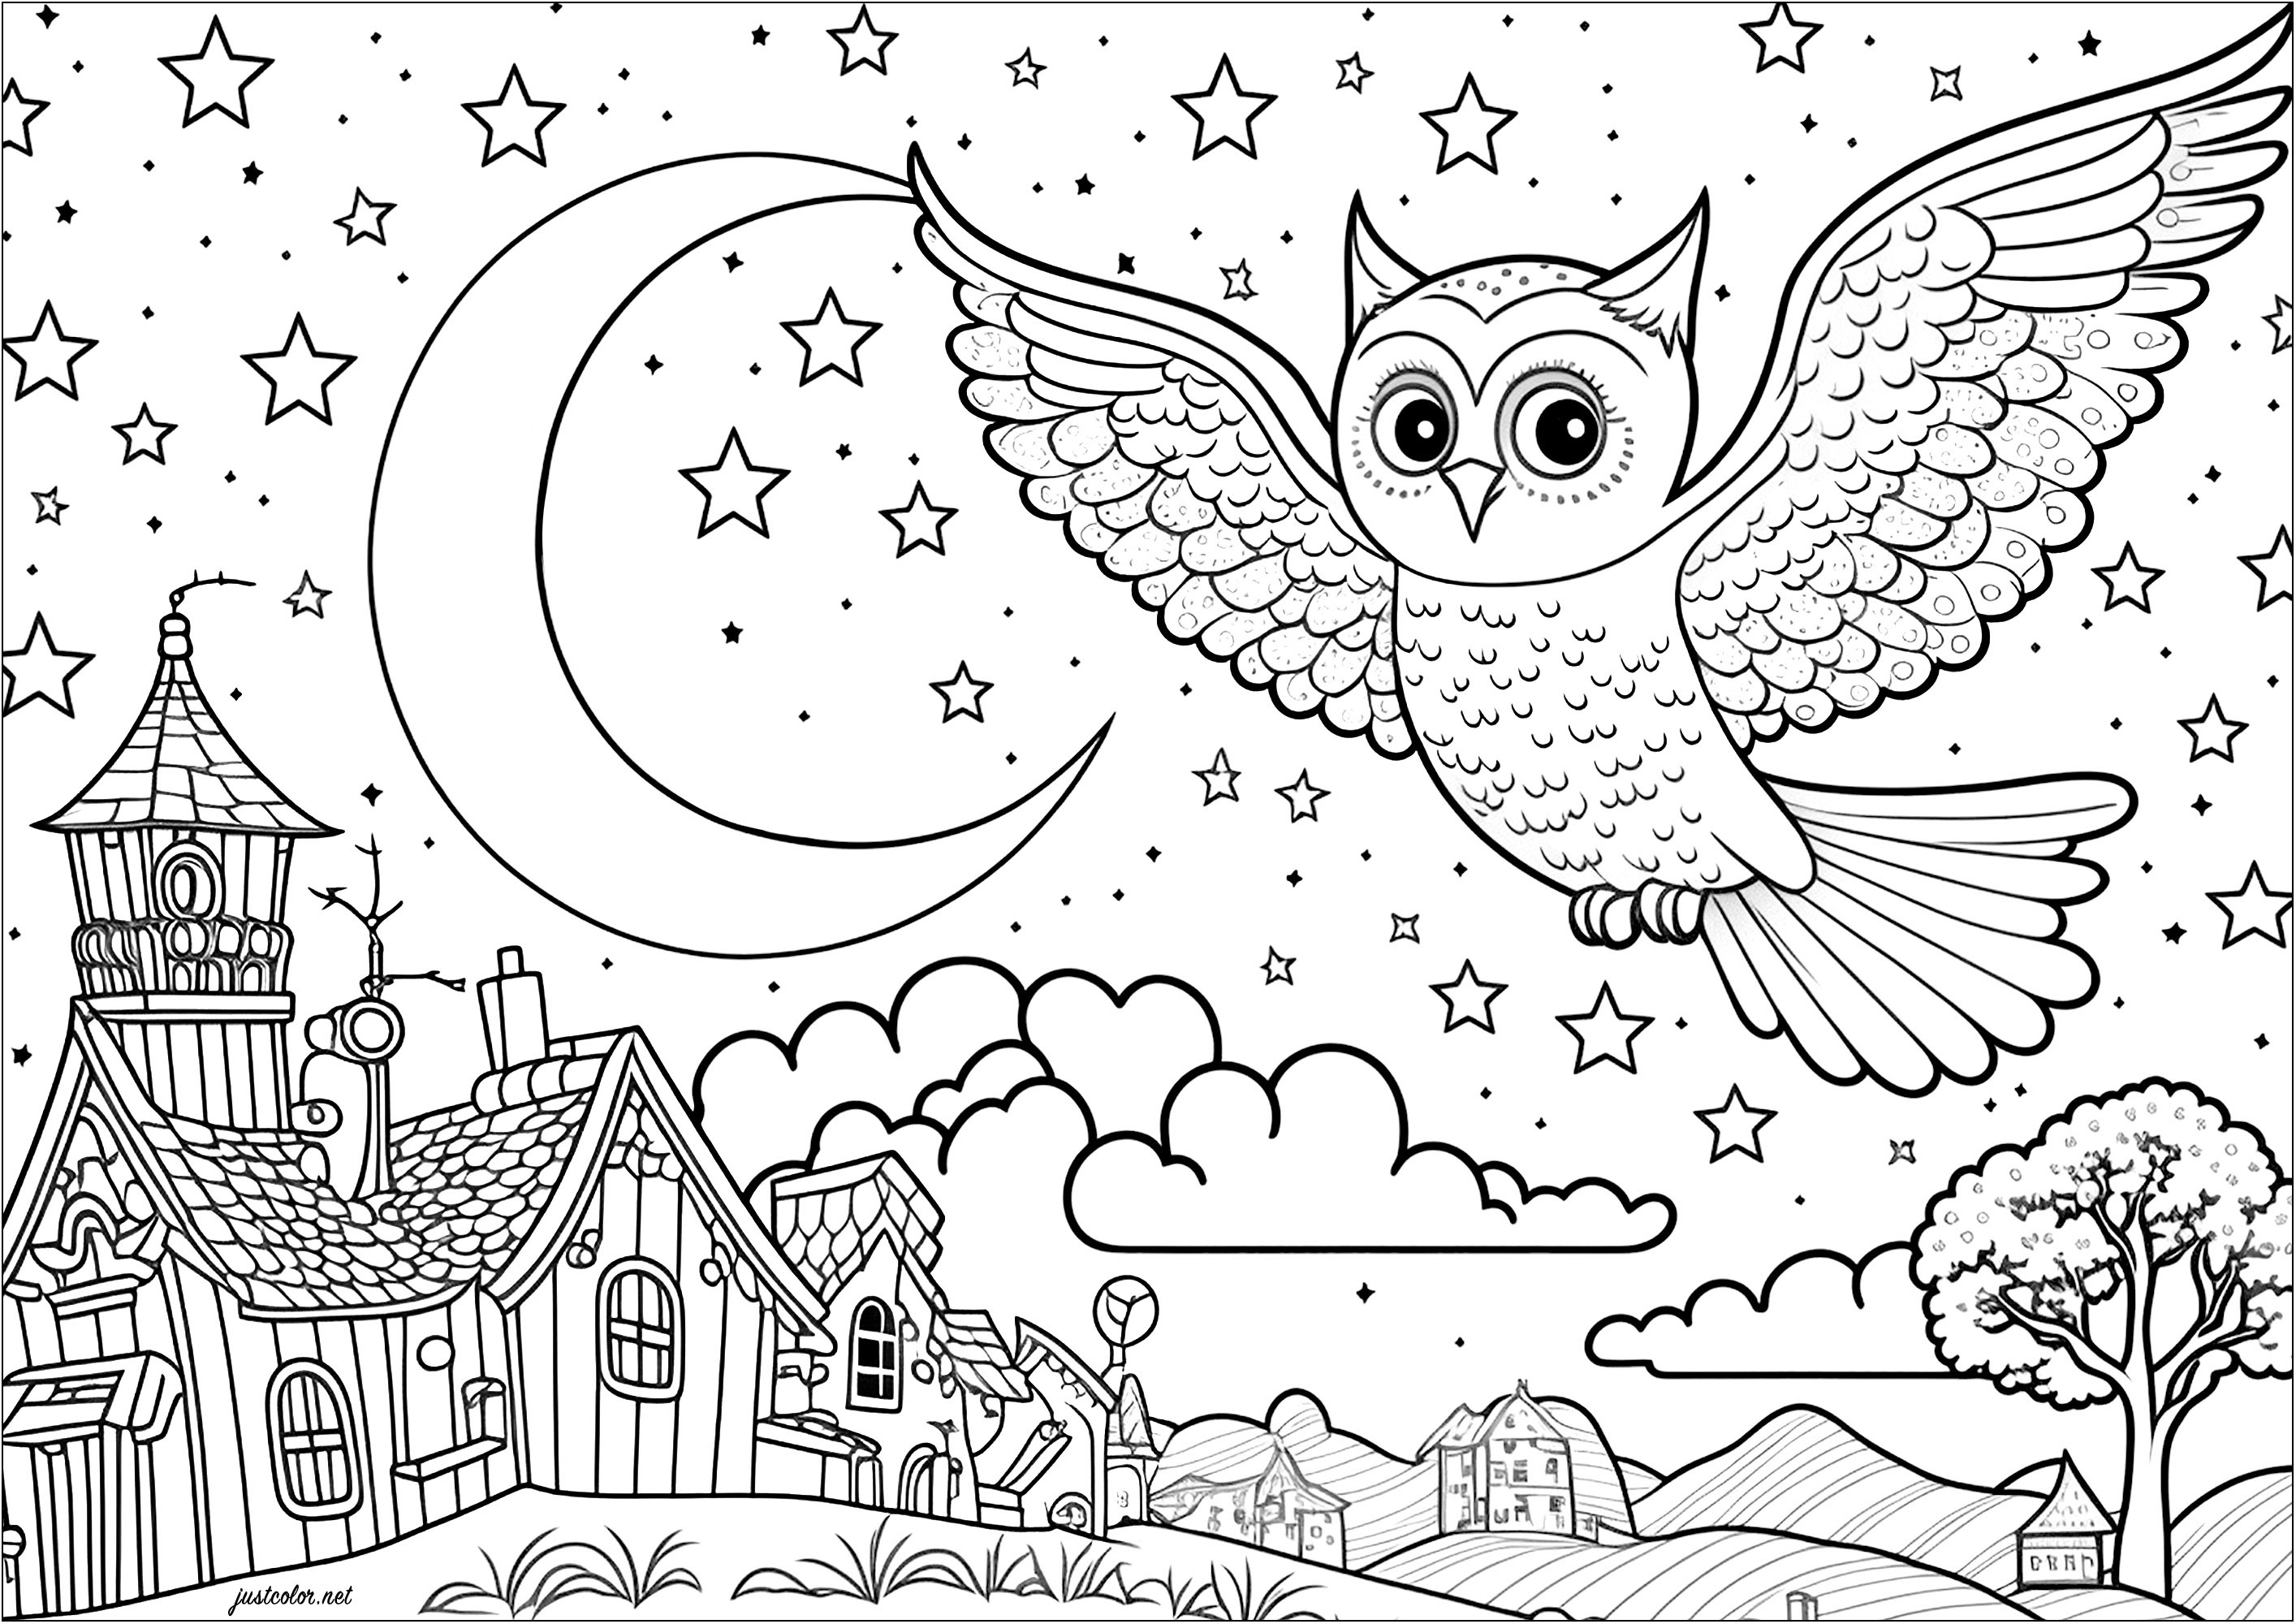 Coloring of an owl flying over a village. This beautiful owl is flying while observing the small village nearby.Numerous stars all around the moon give the image a magical atmosphere.